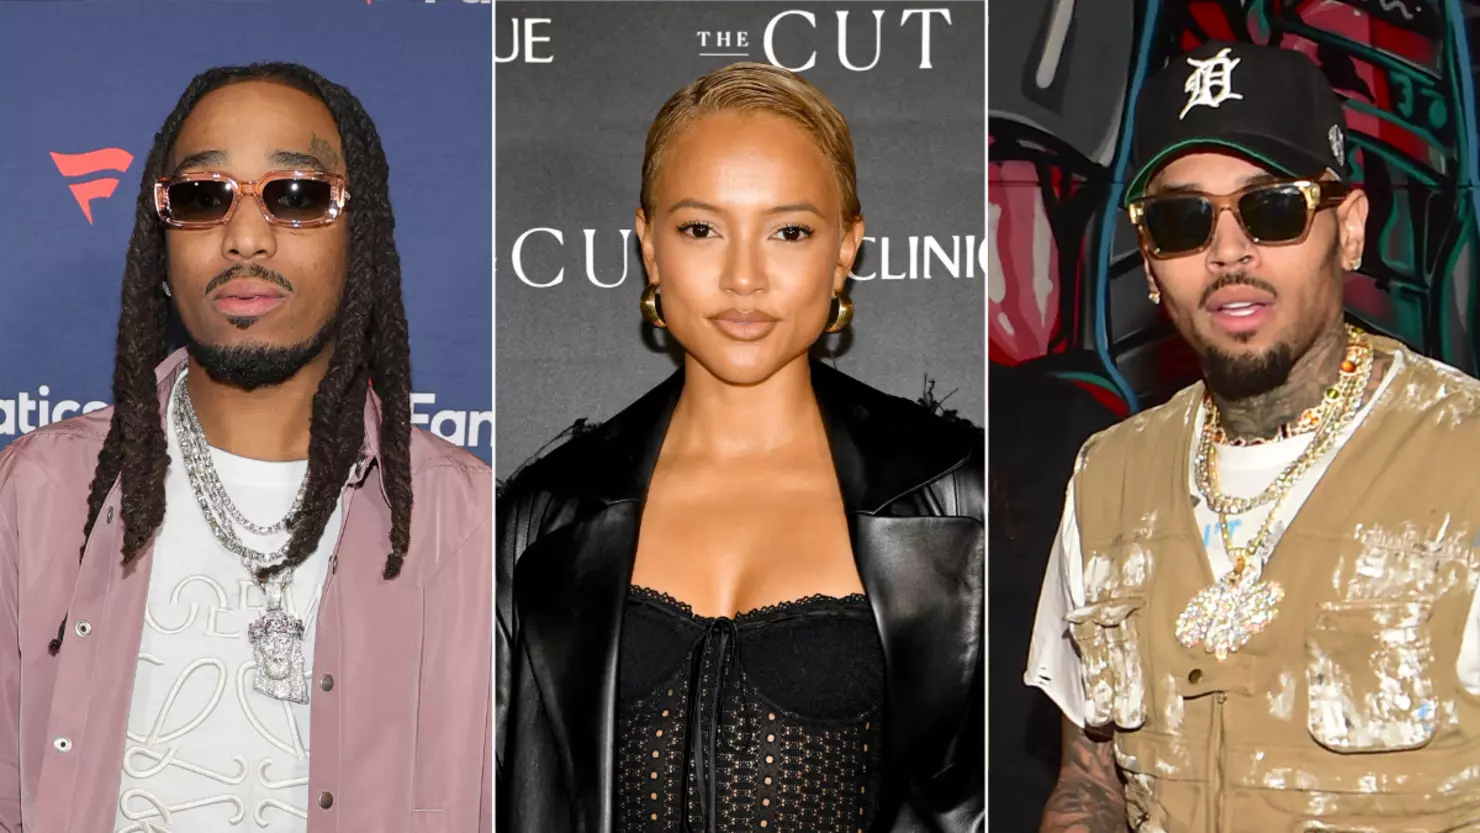 Karrueche Tran Reacts to Chris Brown, Quavo Feud Over Her [Video]